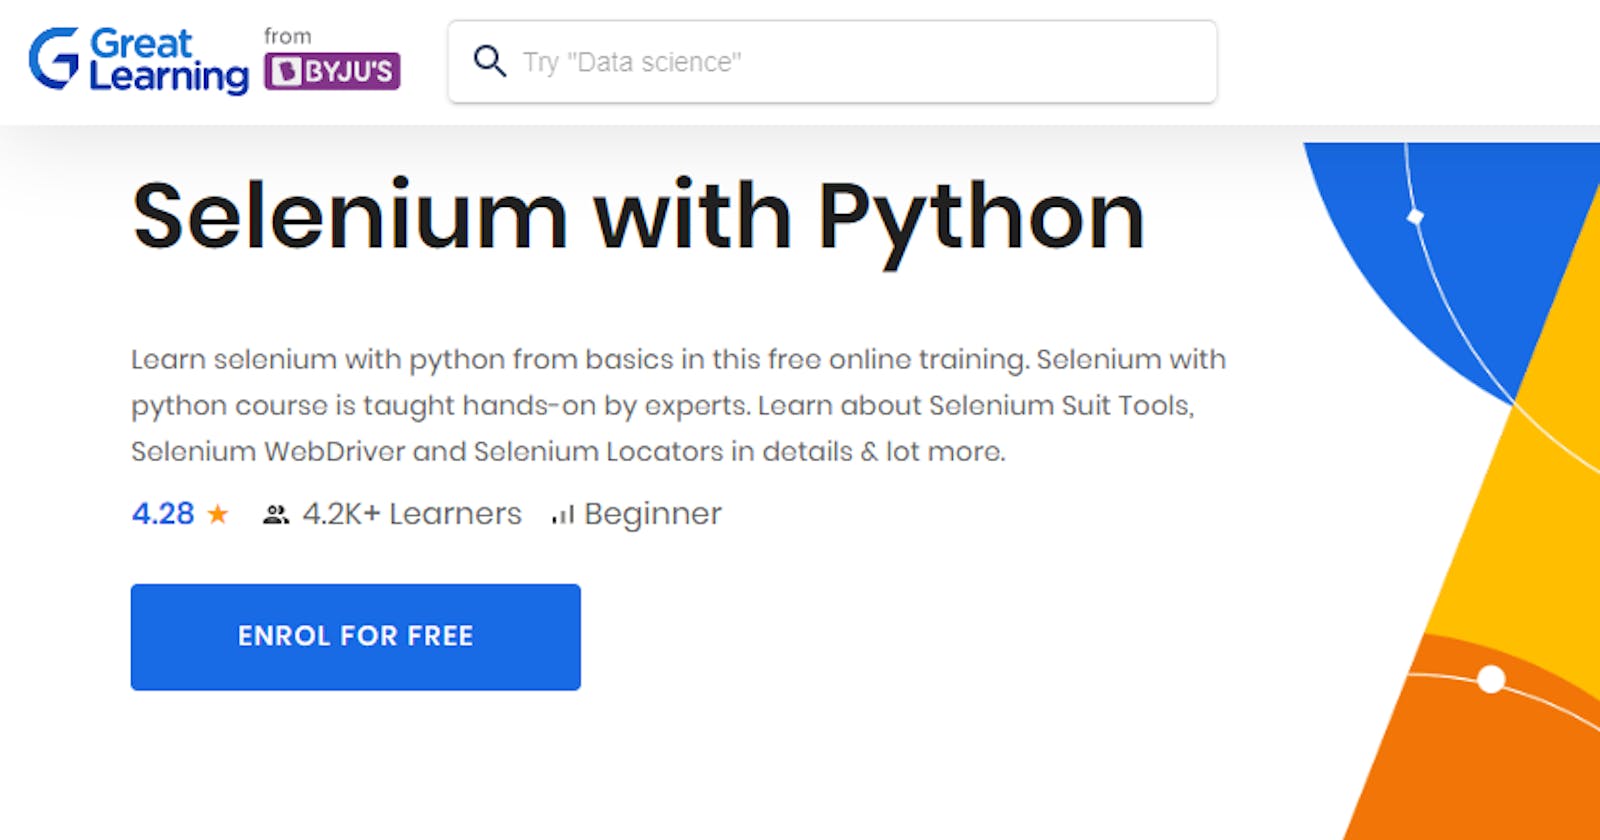 [Great Learning] Selenium with Python